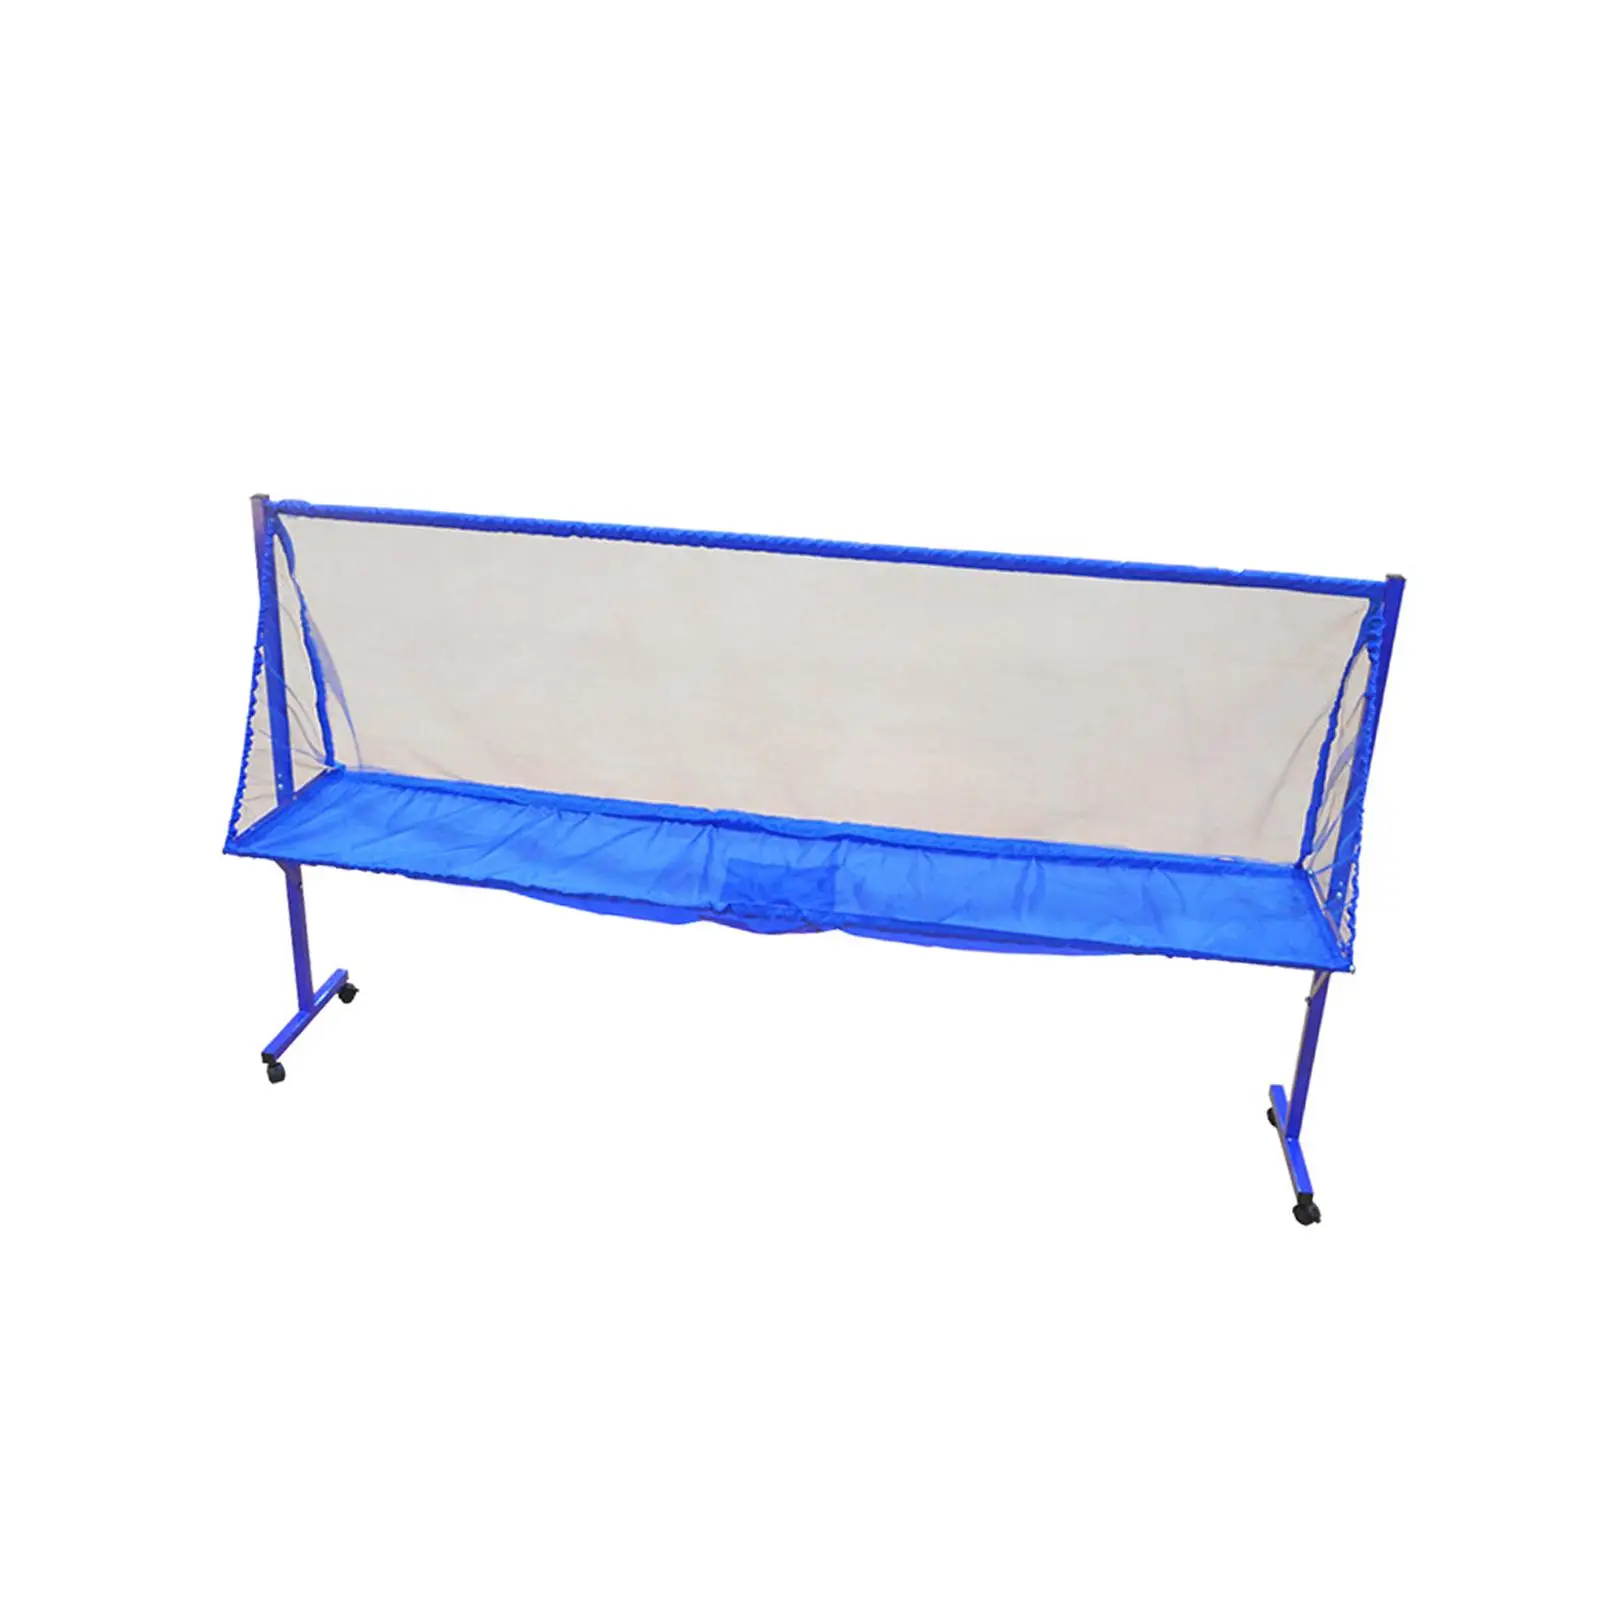 Table Tennis Ball Catch Net Ball Collector Large Ping Pong Recycle Catcher Easy to Assemble for Self Training